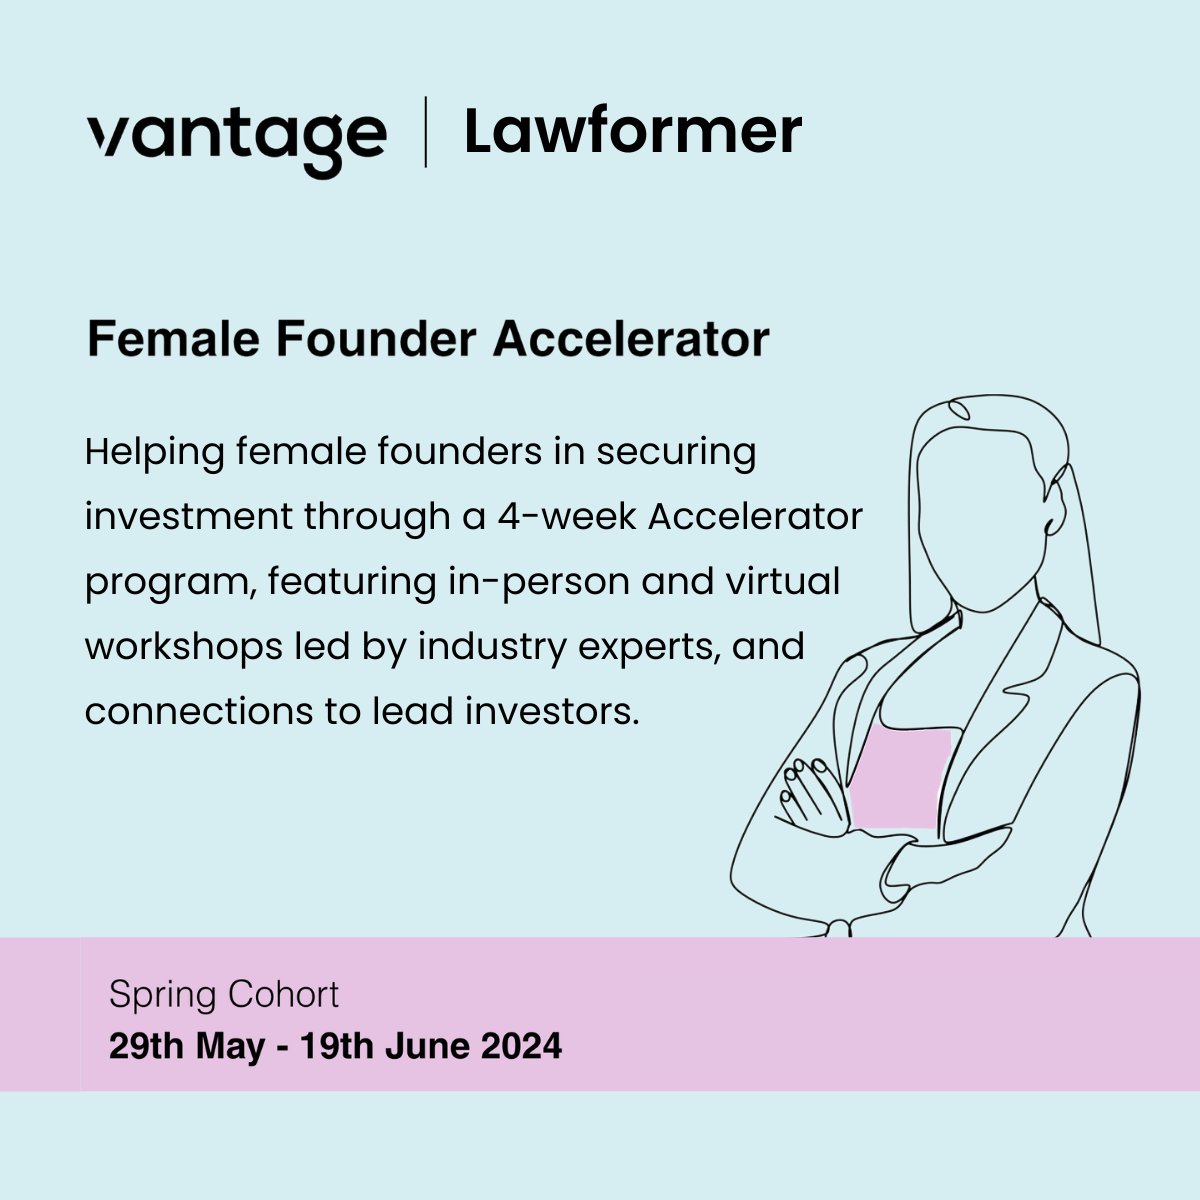 Starting the week strong! 🚀 We are super excited to announce that we have been selected for Vantage's Female Founder Accelerator Spring Cohort, designed to assist female founders in accessing investment.

#accelerator
#venturecapital
#femalefounders